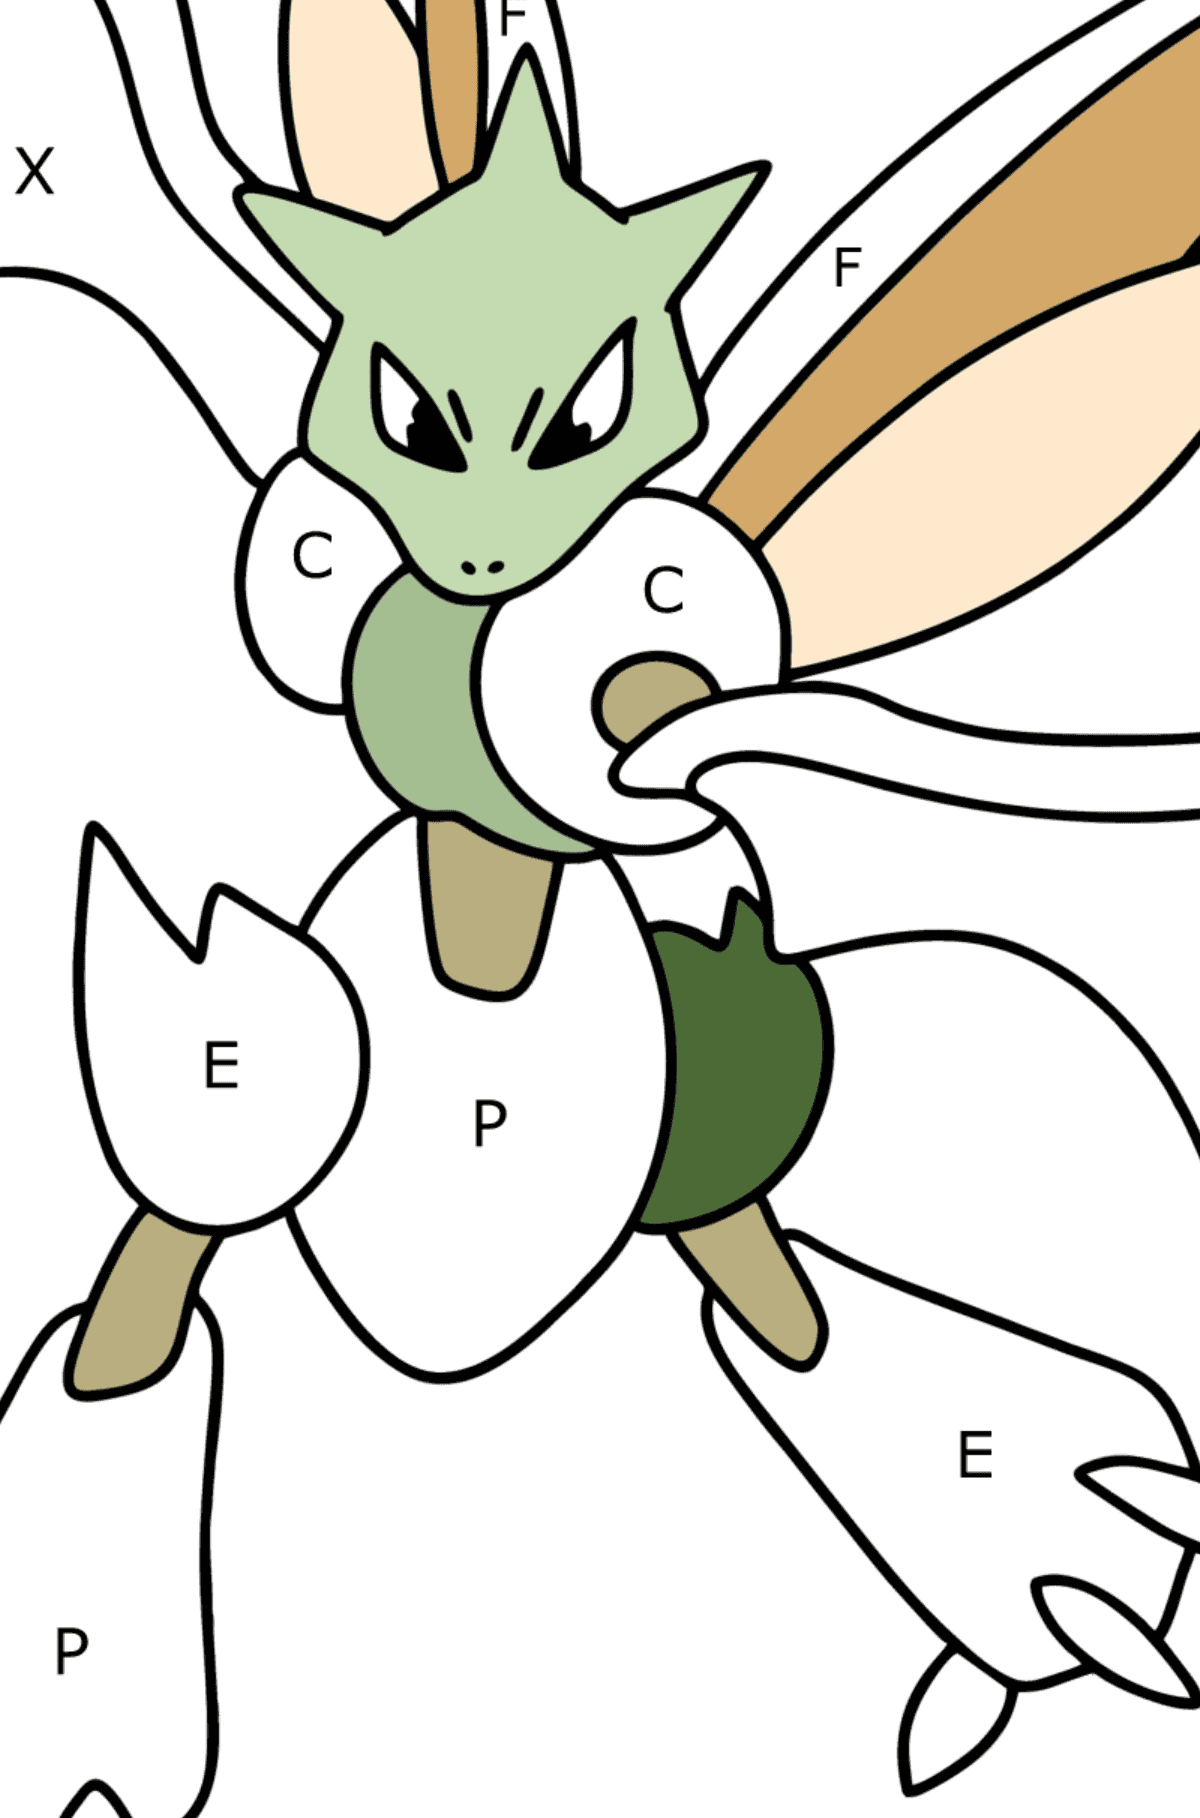 Coloring page Pokemon Go Scyther - Coloring by Letters for Kids